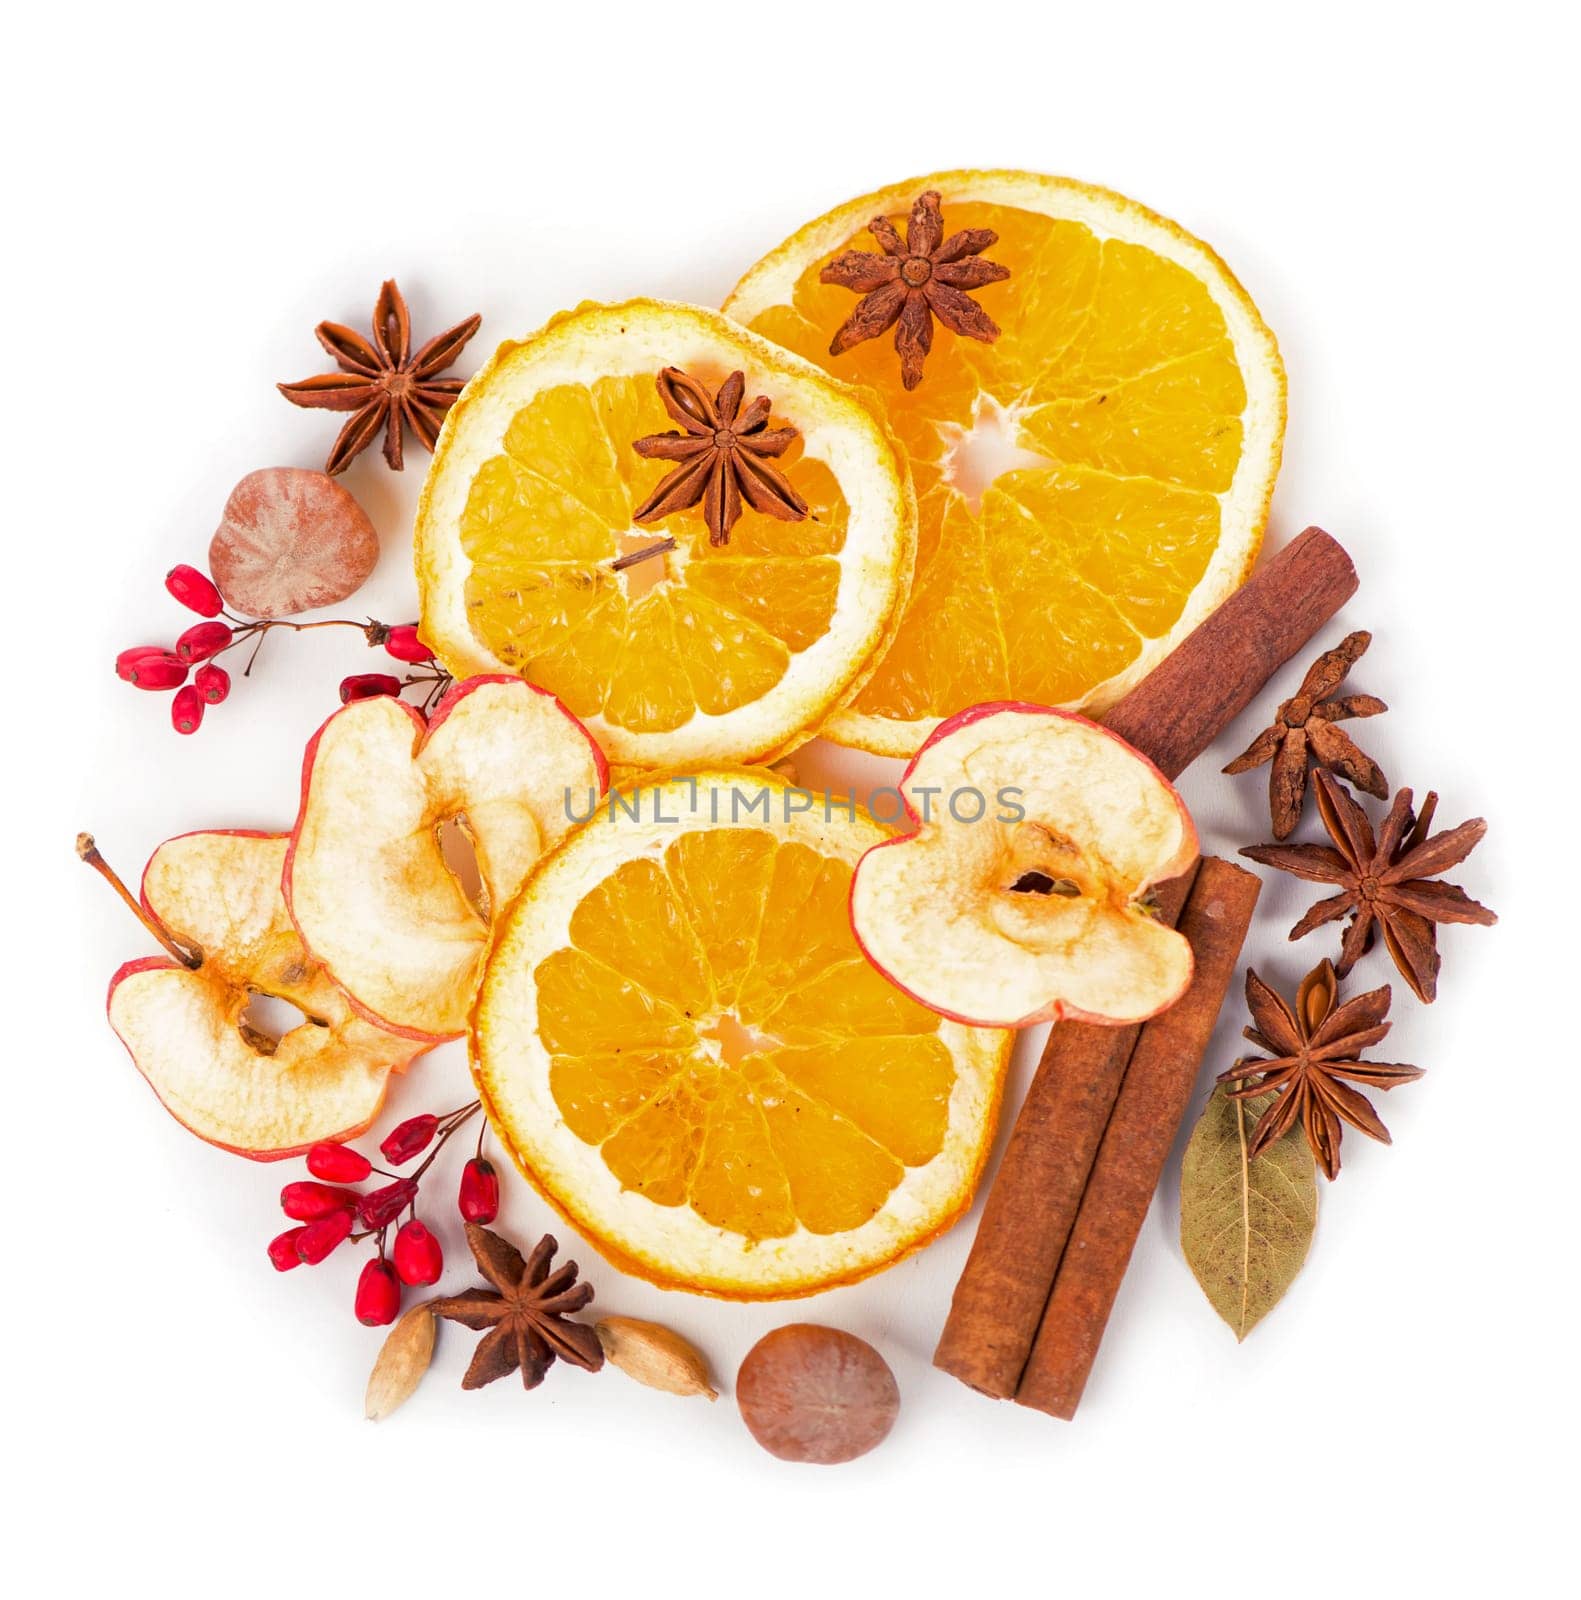 Christmas spices - cinnamon, anise, nuts, apples and dried orange slices by aprilphoto